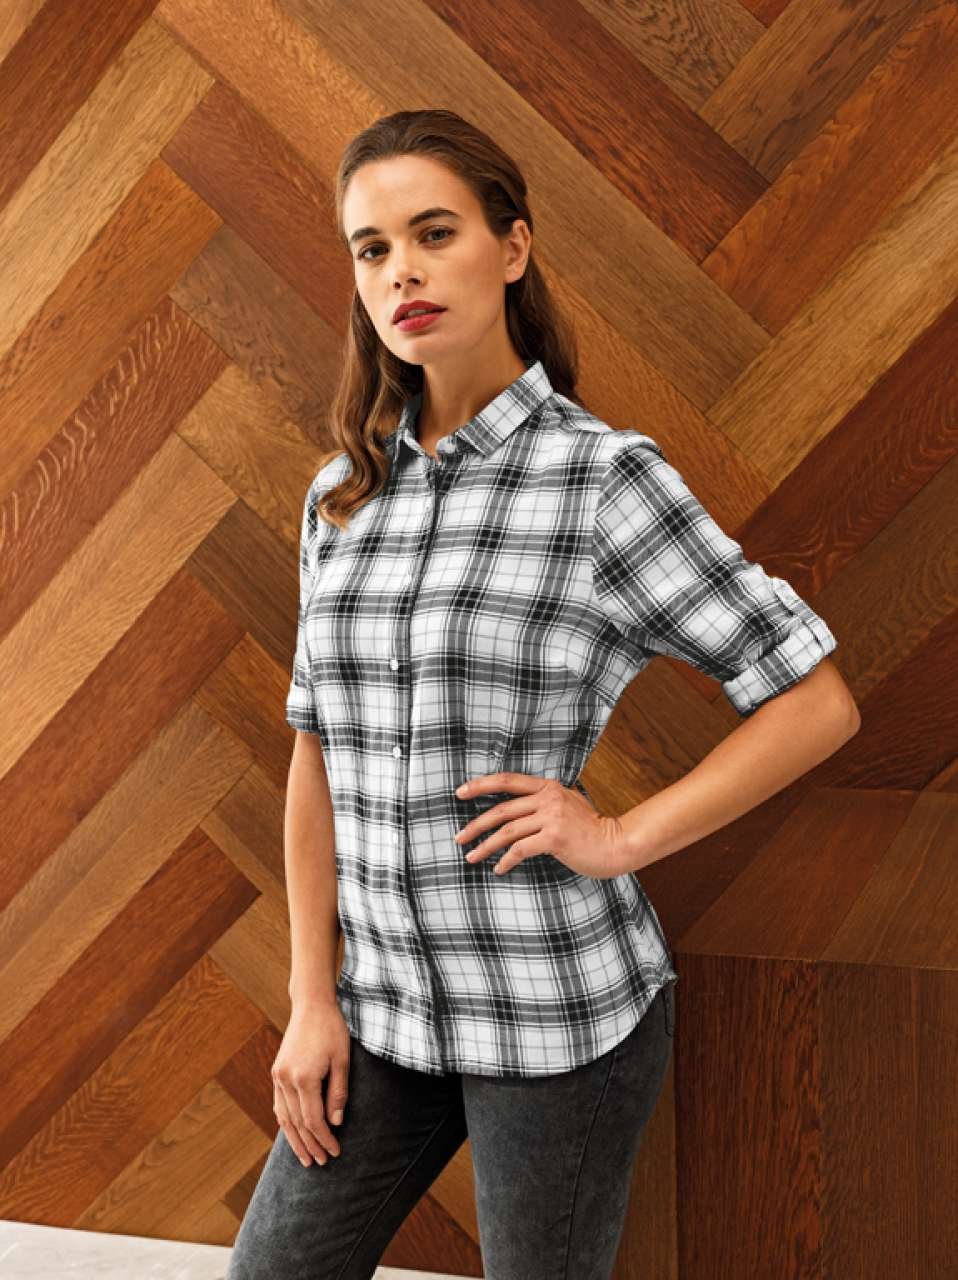 Ginmill Check - Ladies' Cotton Long Sleeve Shirtginmill-check-ladies-cotton-long-sleeve-shirt-3959.jpg